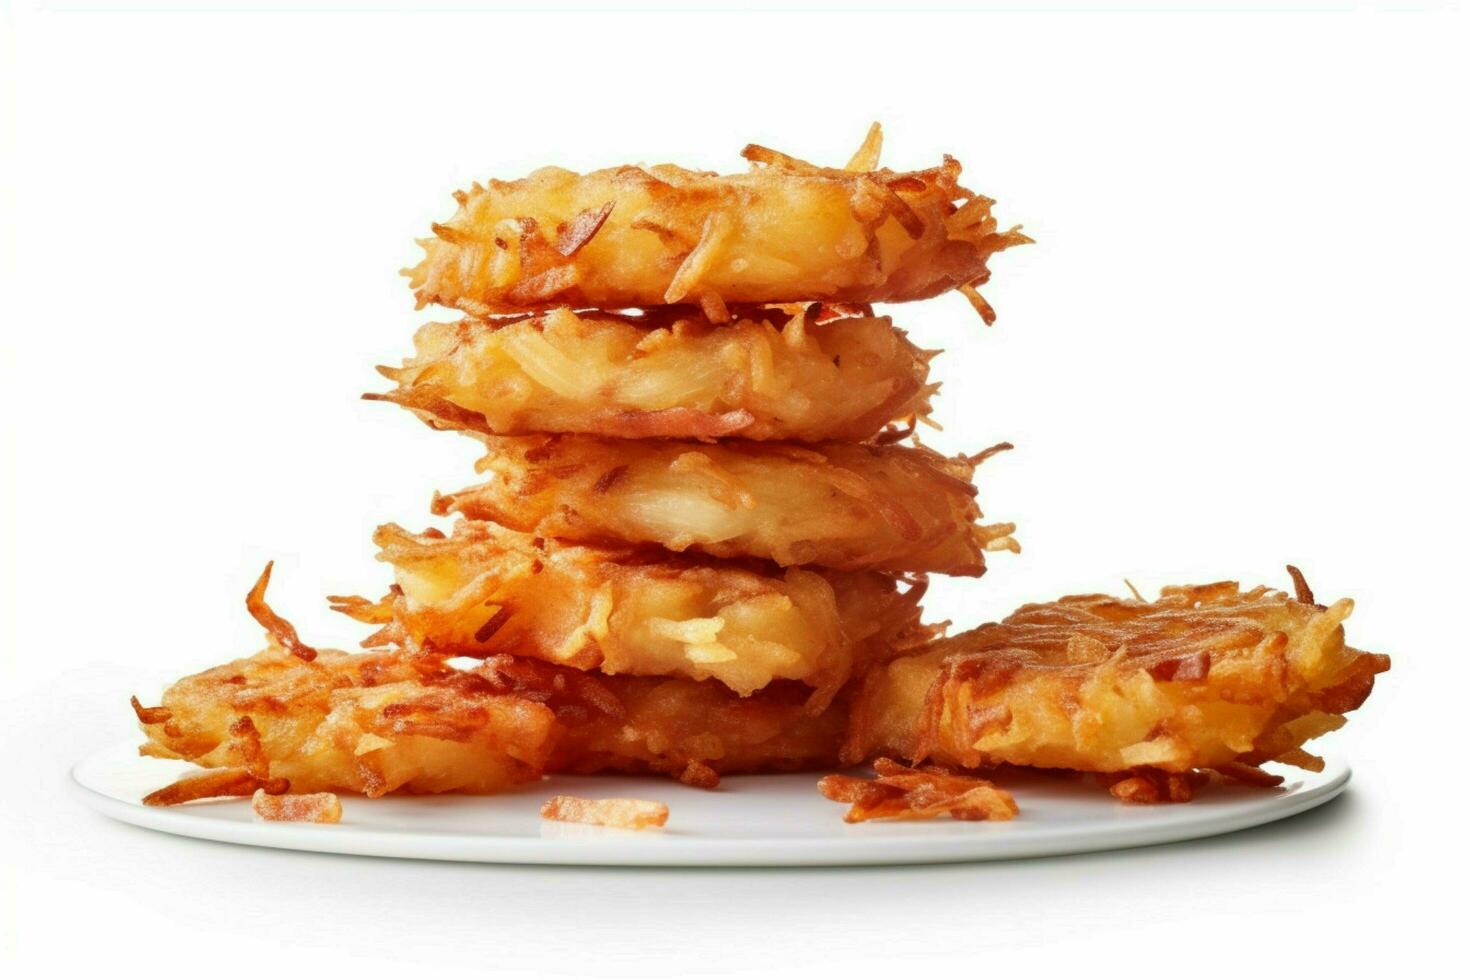 photo of hash browns with no background